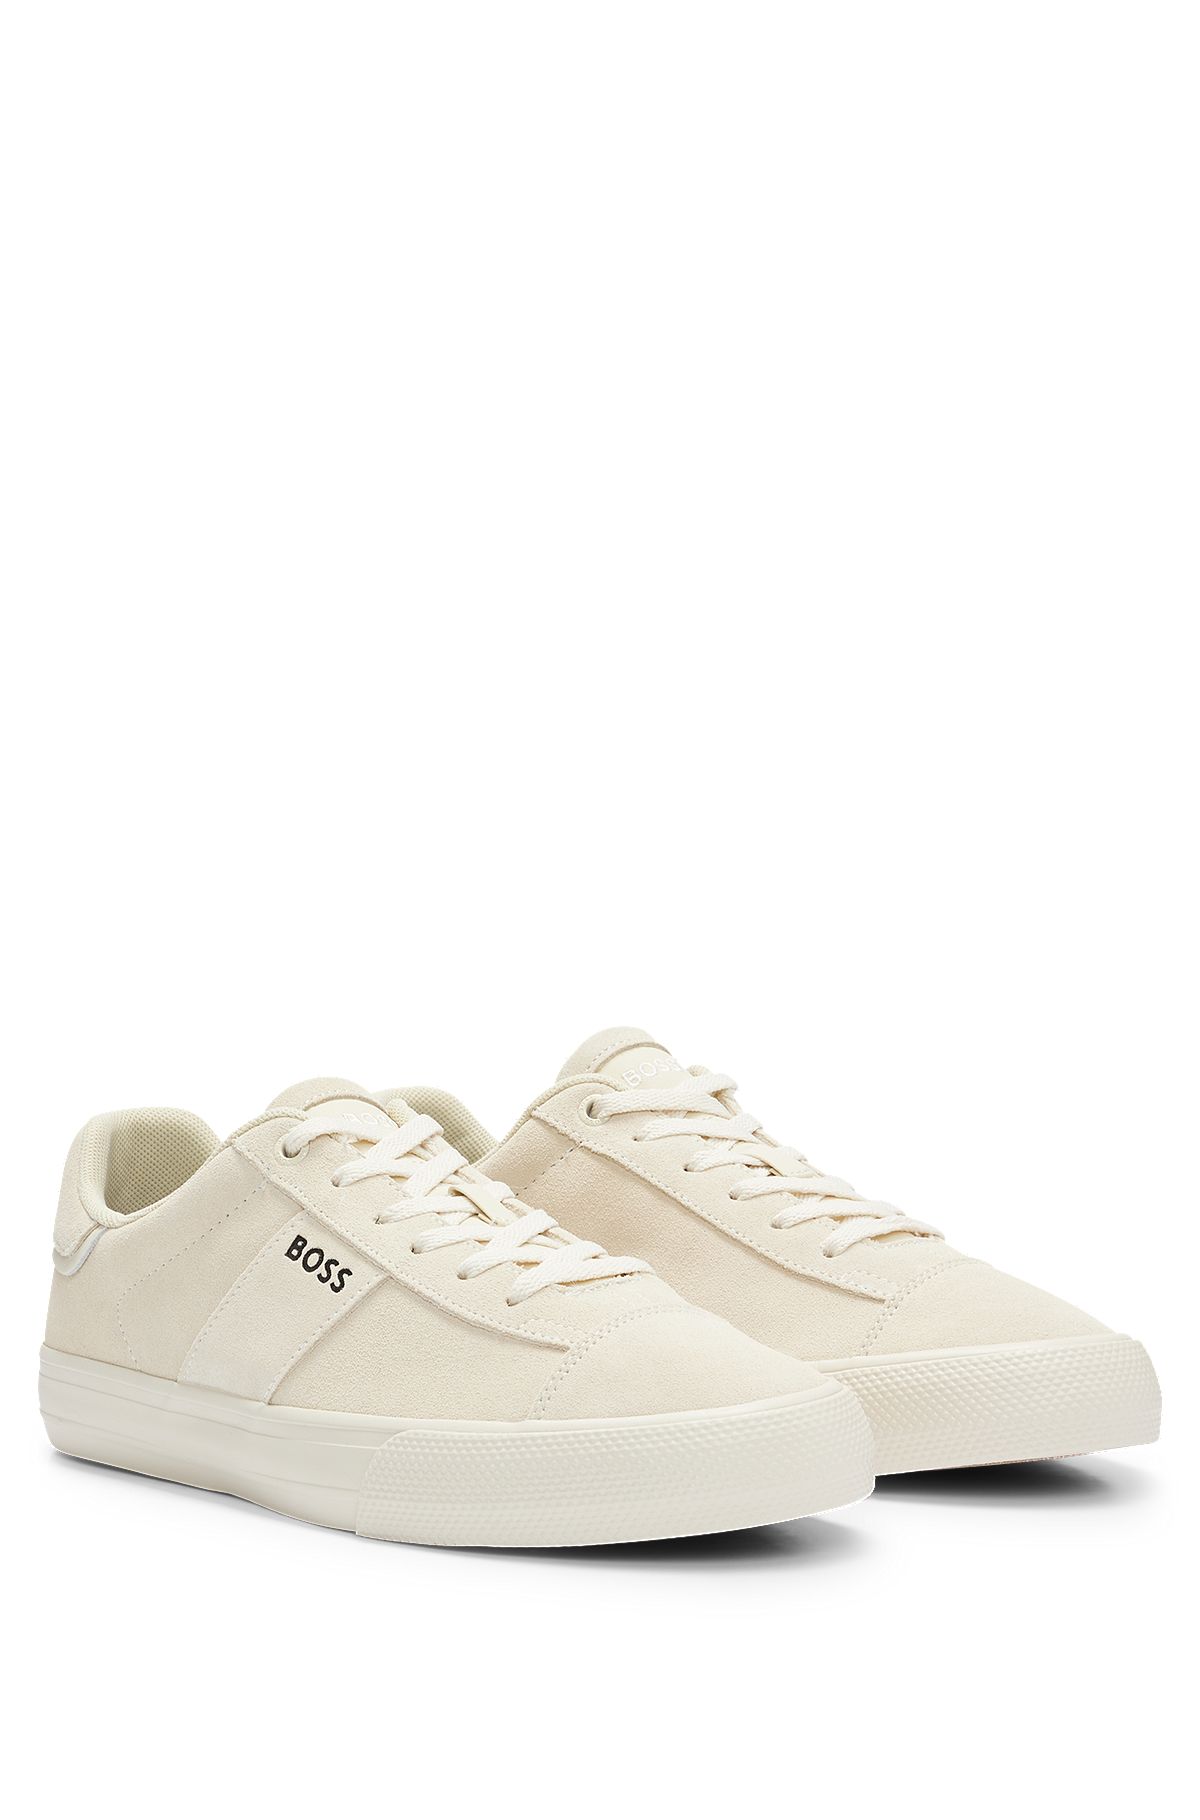 Suede cupsole trainers with logo details, Light Beige